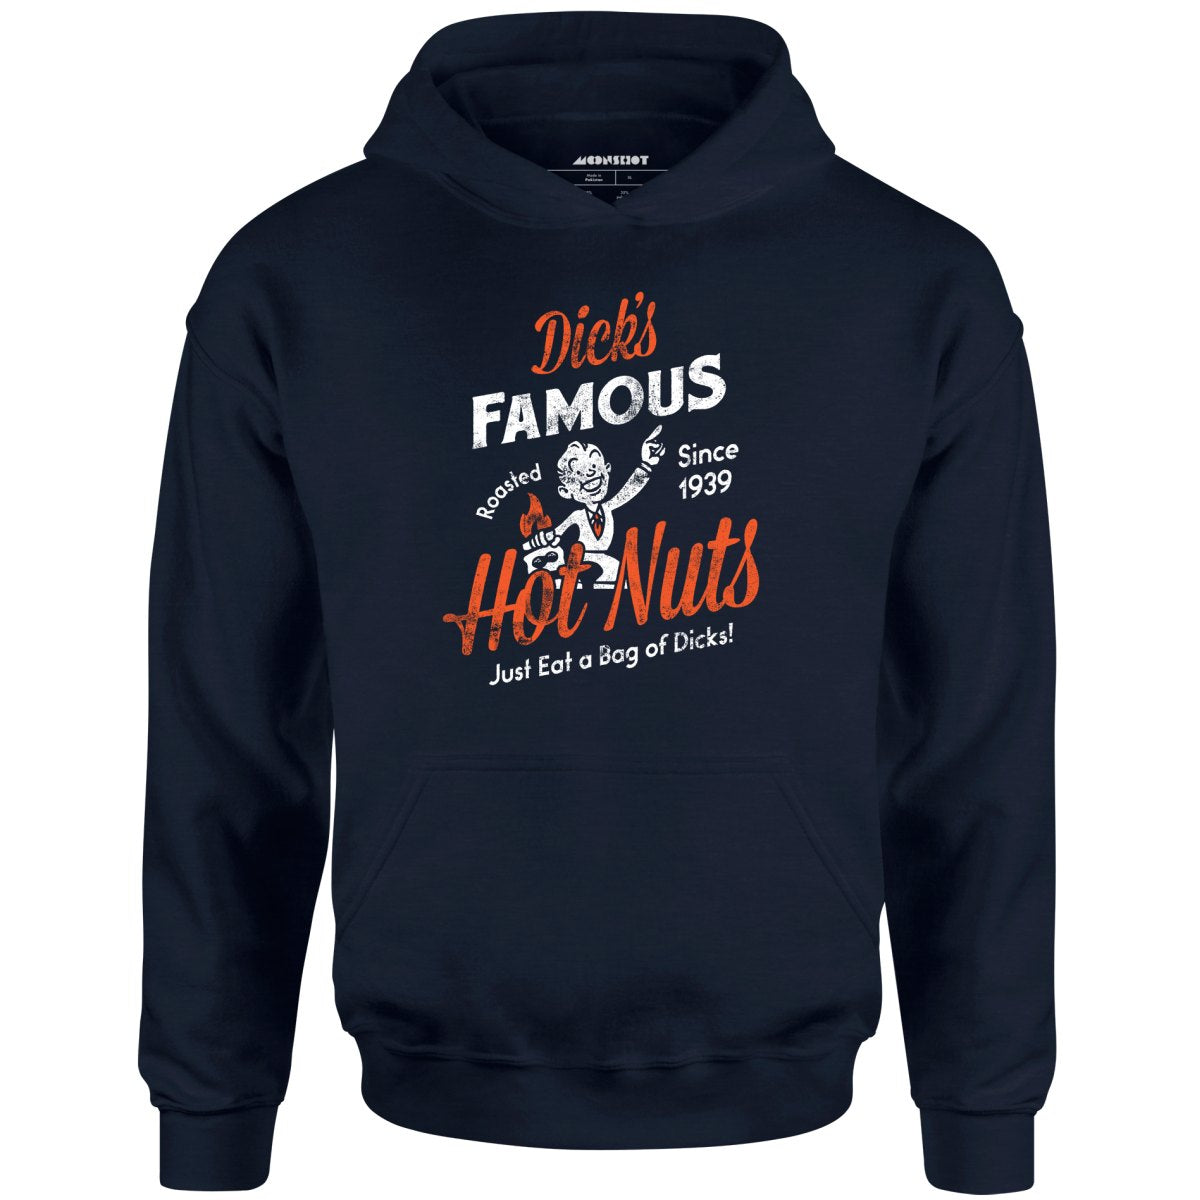 Dick's Famous Hot Nuts - Unisex Hoodie